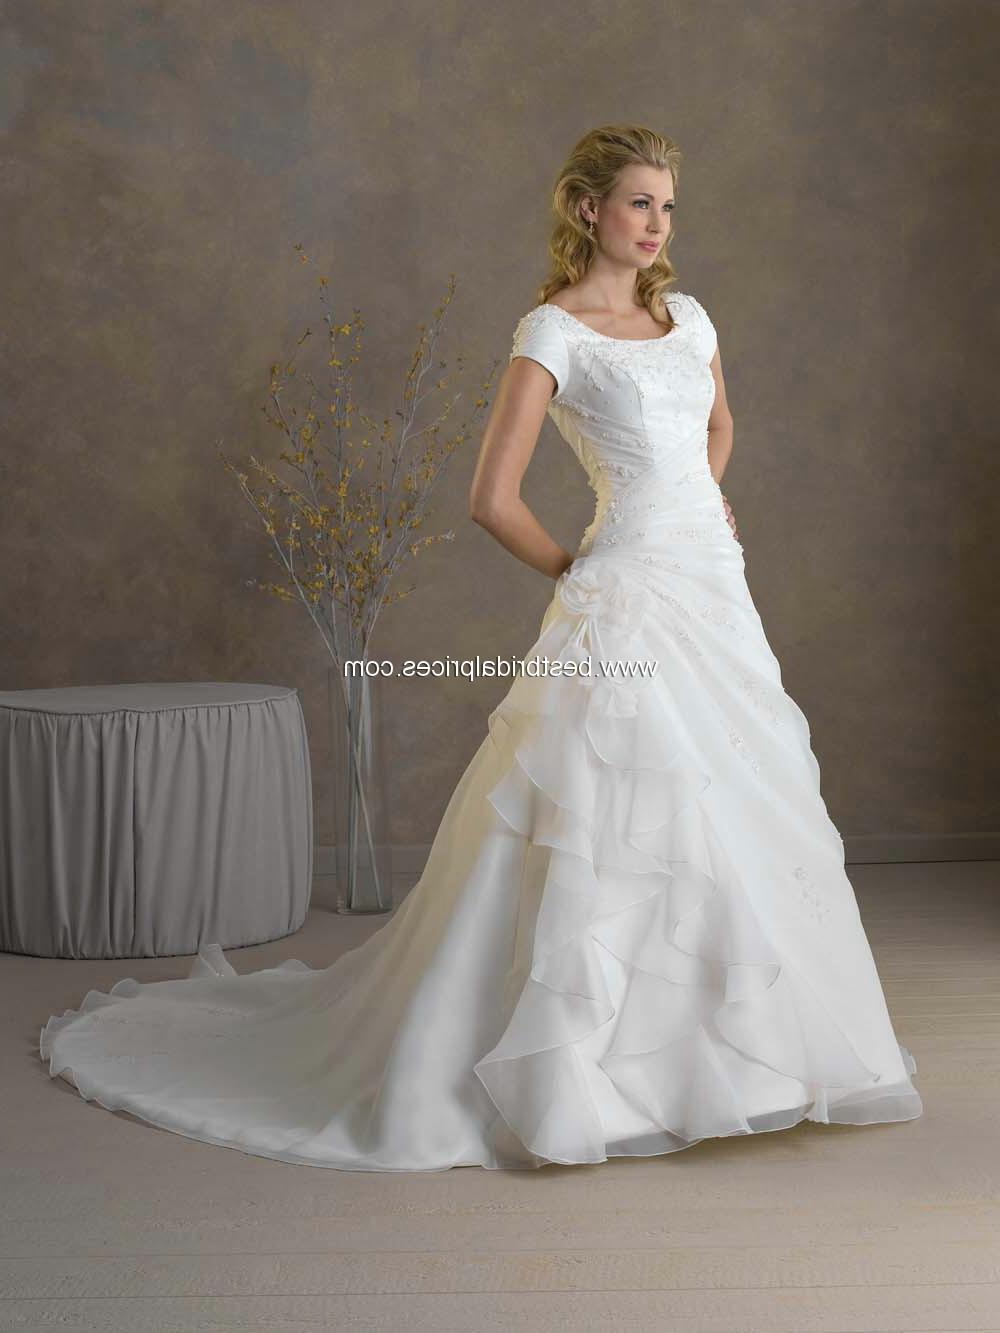 Pictures of Bridal Dresses